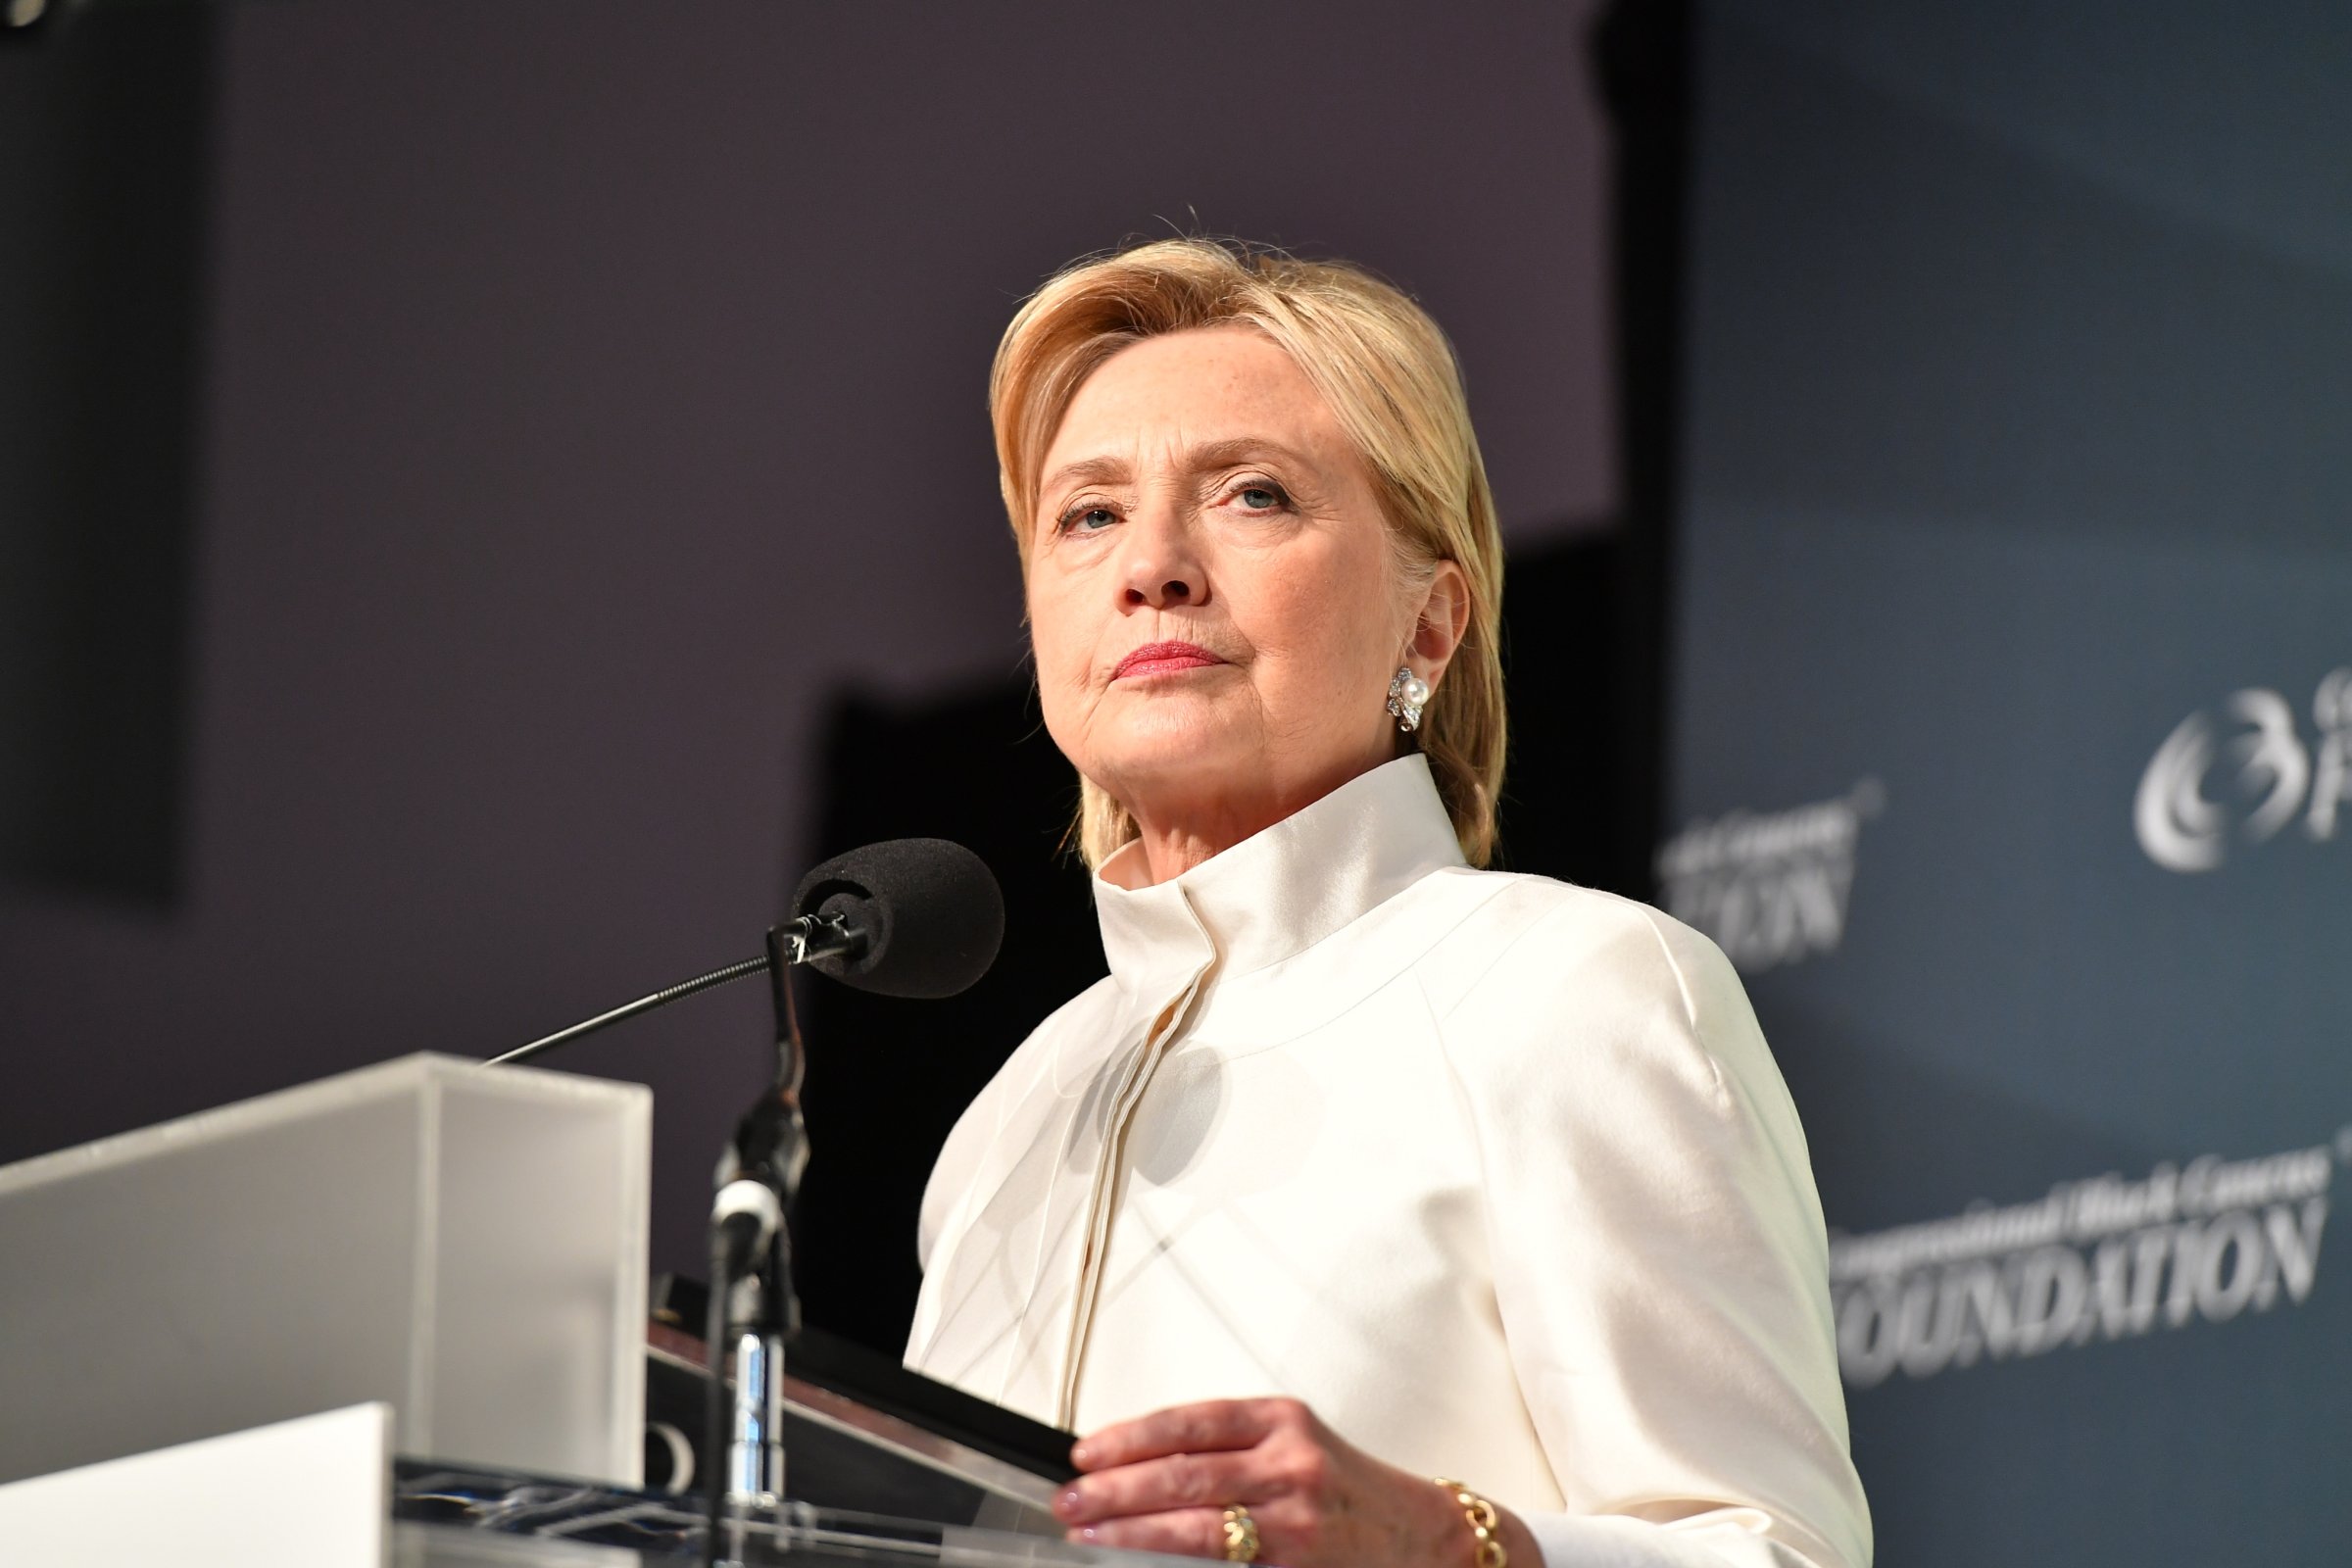 Presidential candidate Hillary Clinton speaks at the Phoenix Awards Dinner at Walter E. Washington Convention Center in Washington, D.C., on Sept. 17, 2016.